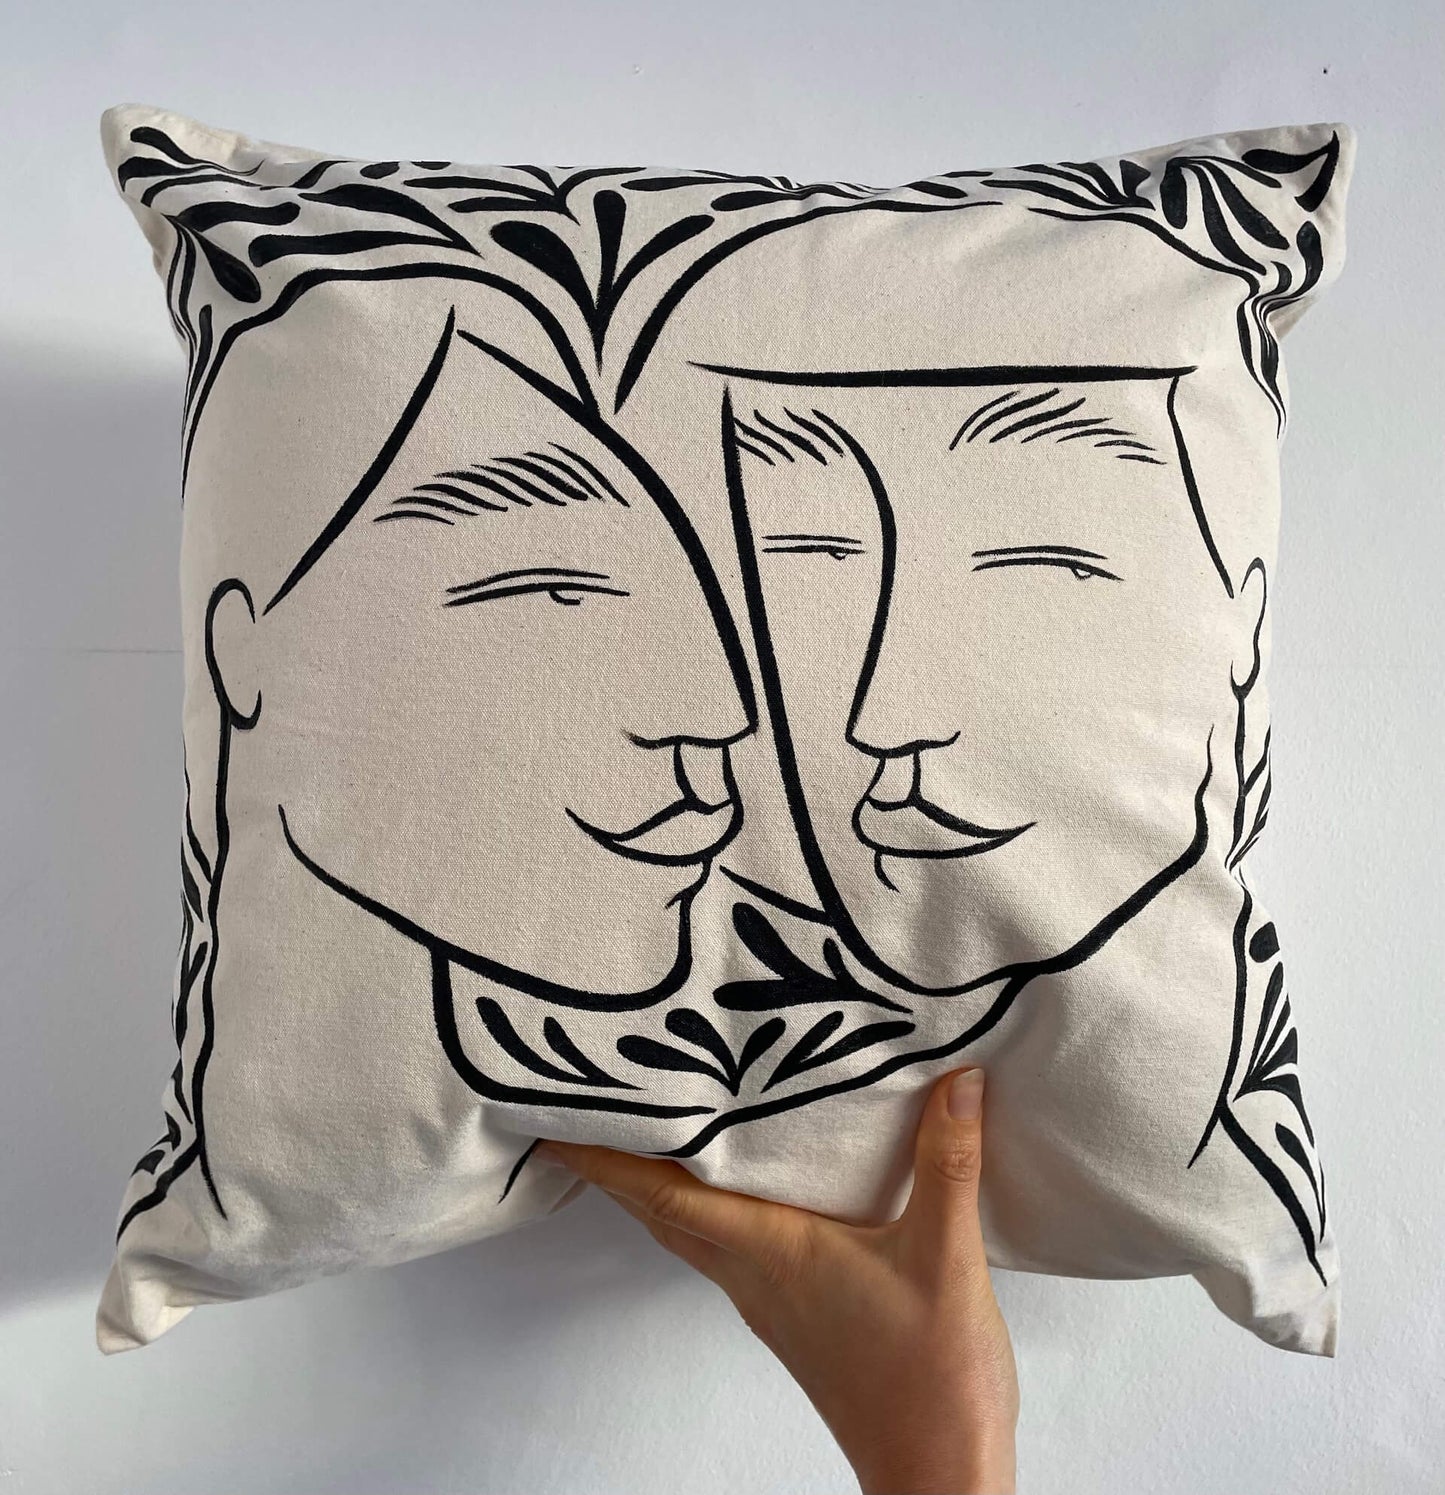 Amy Isles Freeman ‘Lovers in the Garden' - Hand Painted Cushion